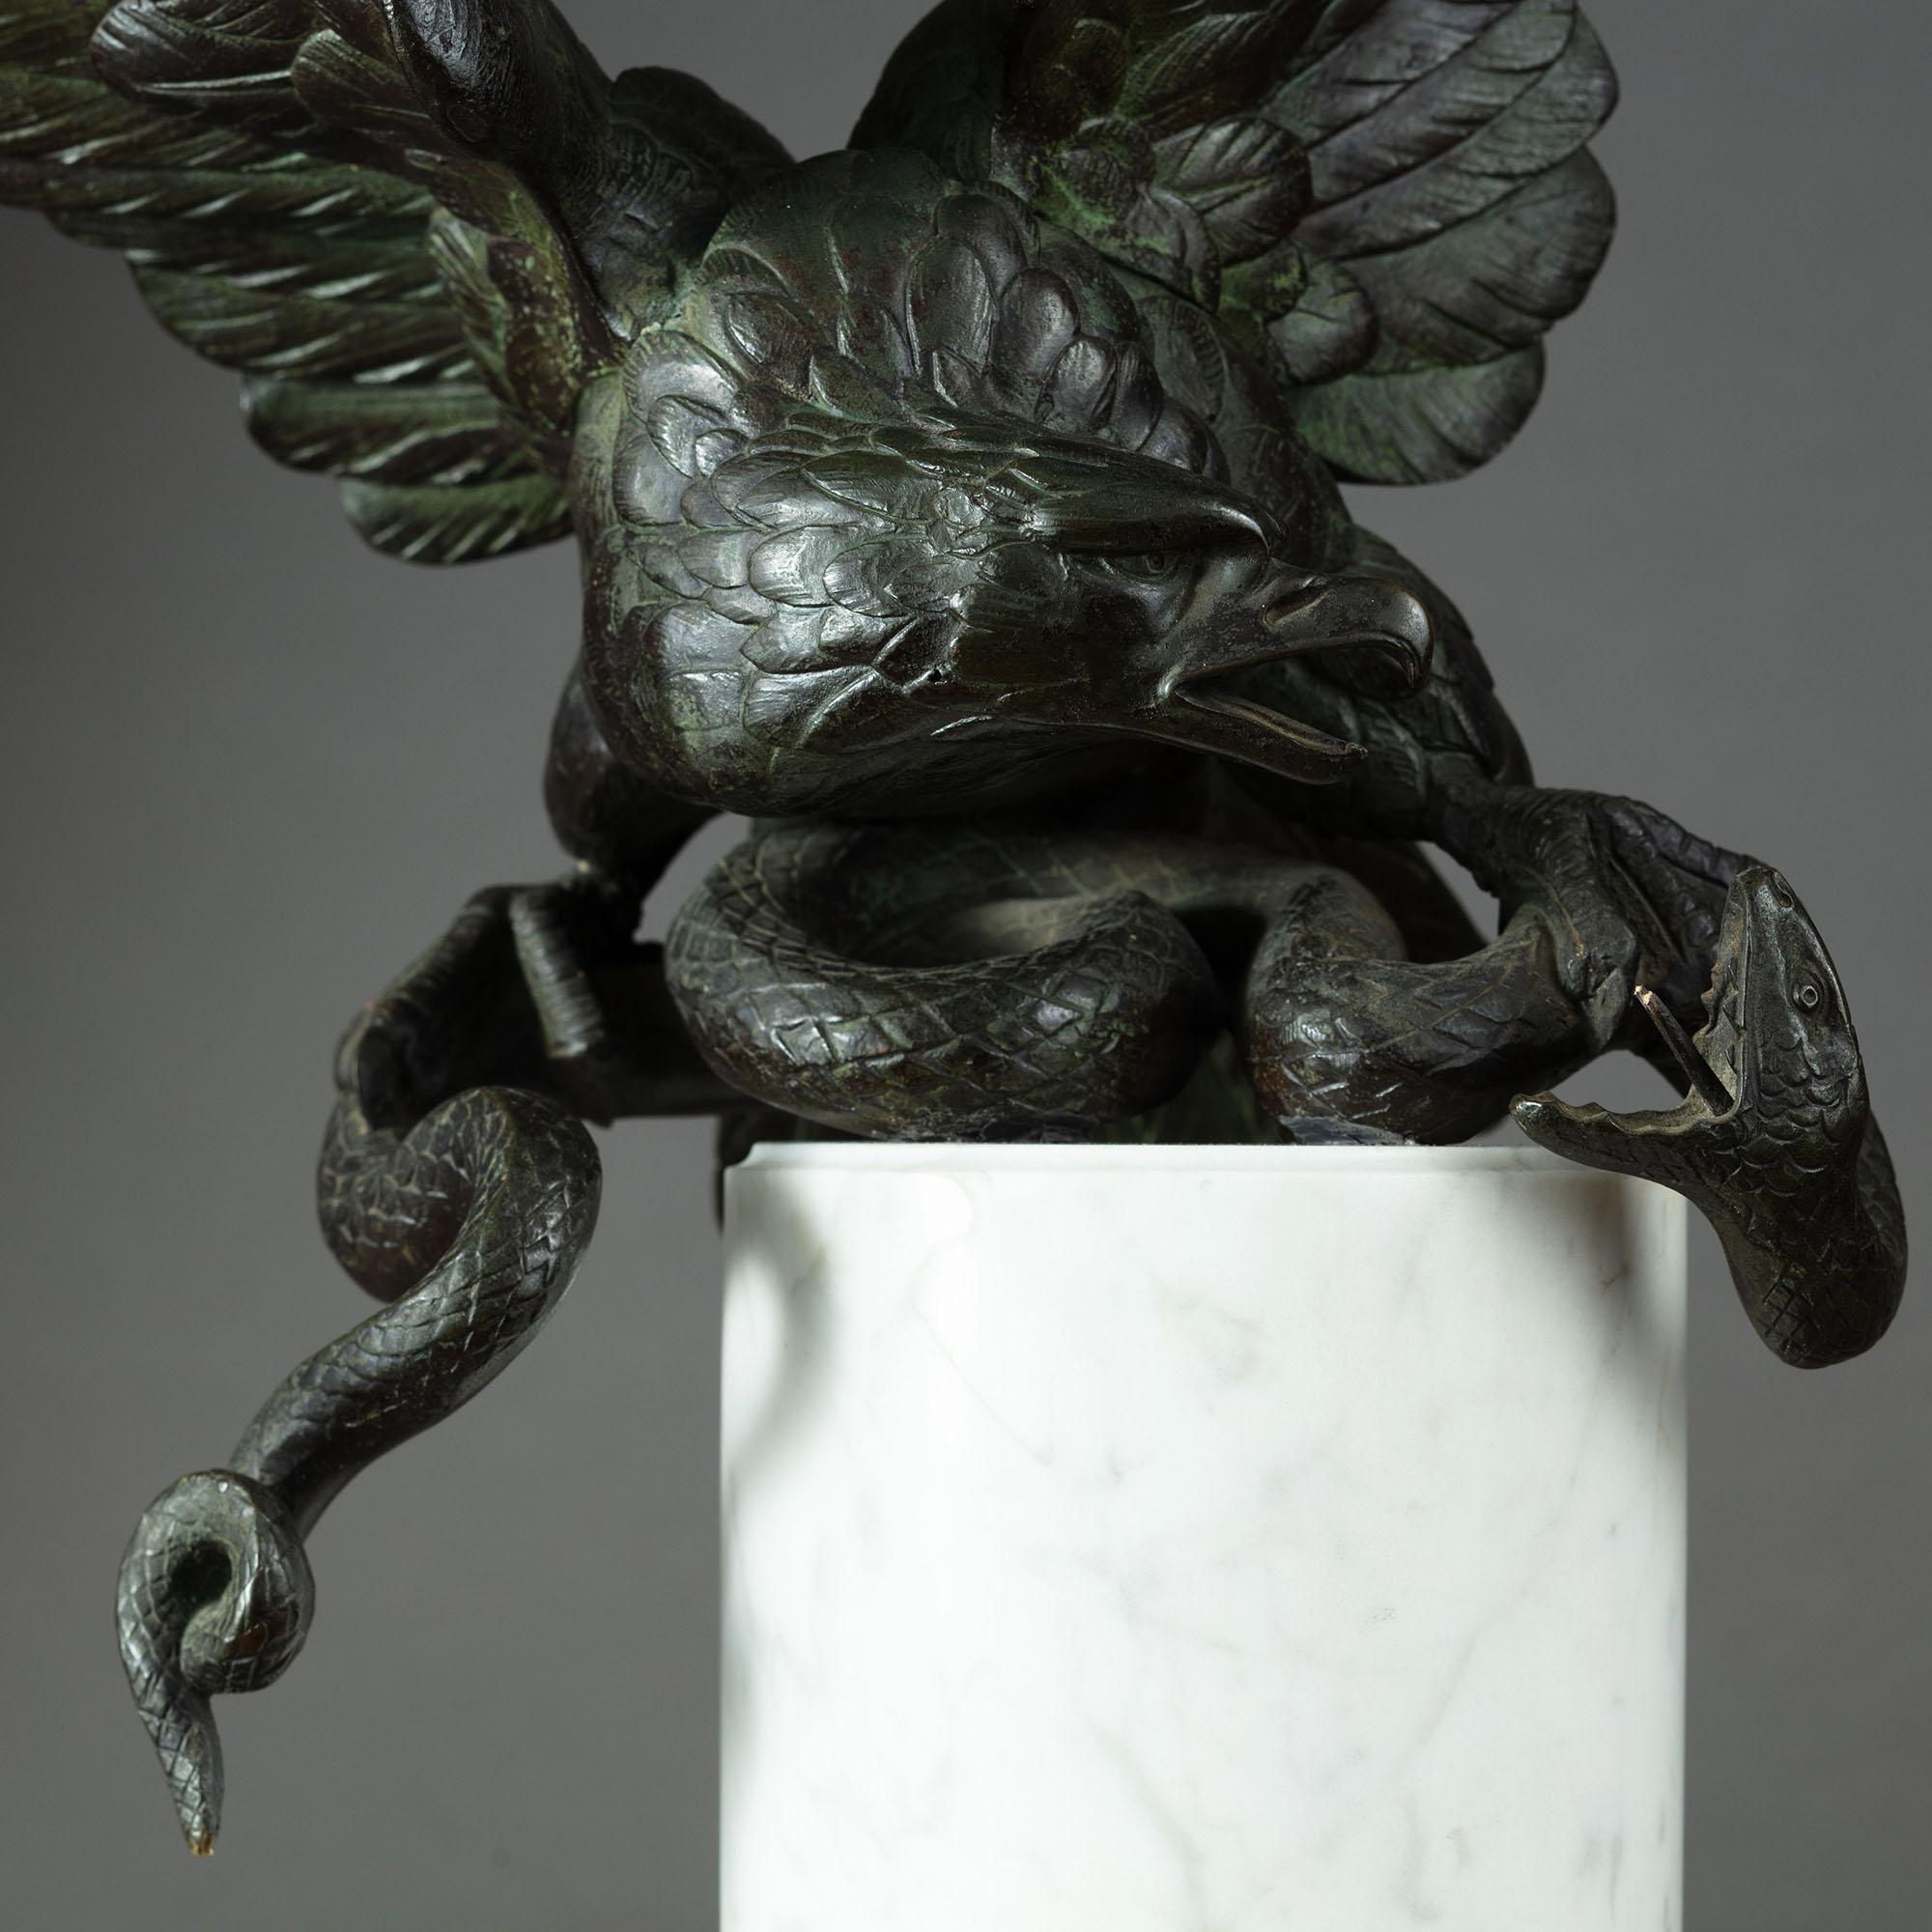 19th century bronze bird of prey fighting a serpent mounted on a white marble pedestal.

Dimensions: Height 15.75? x width 13? x depth 8?.